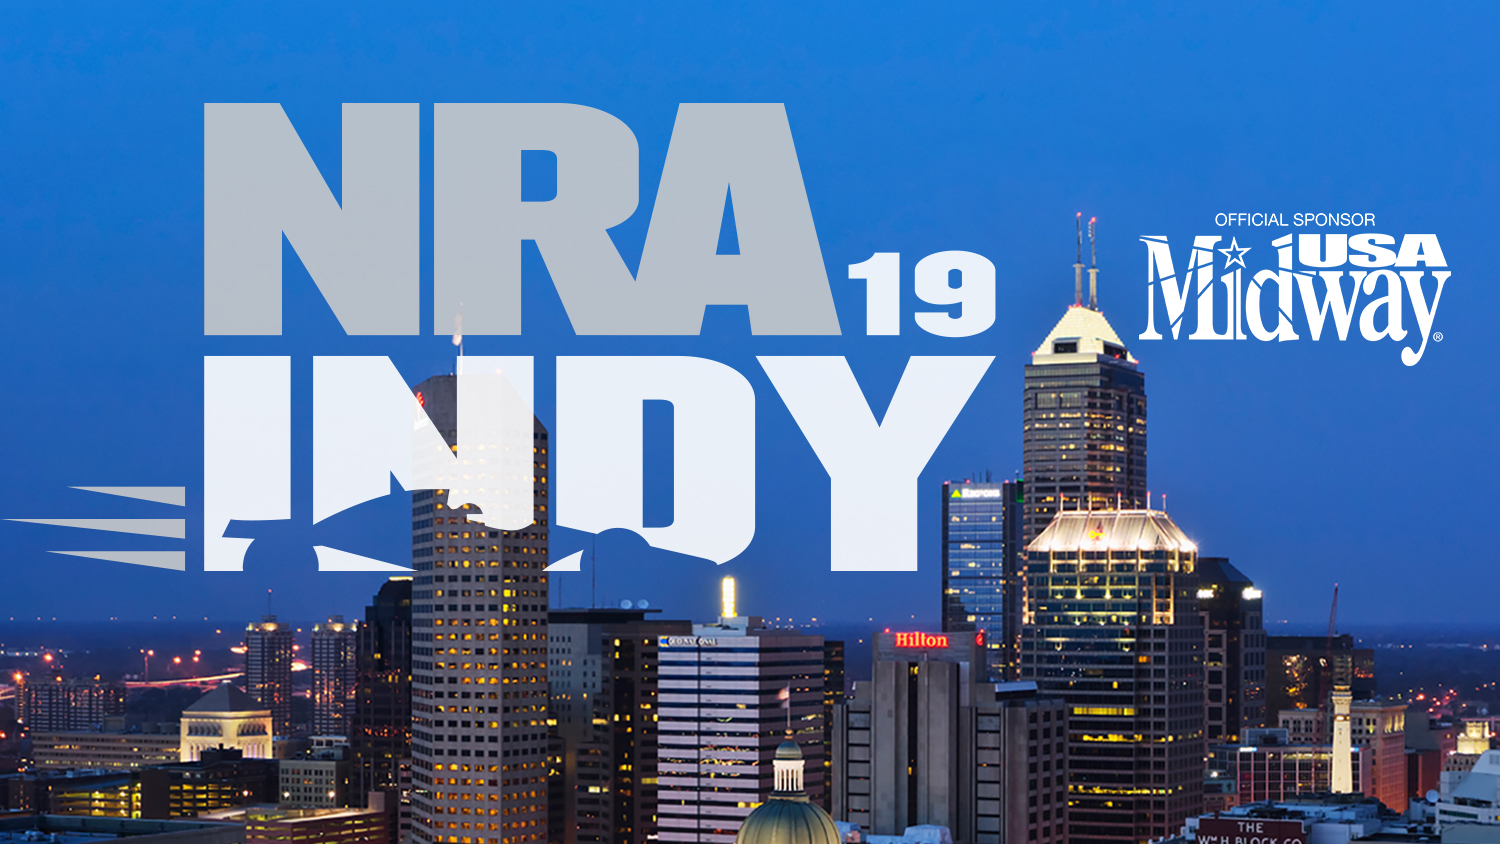 NRA Annual Meeting Events: Thursday, April 25